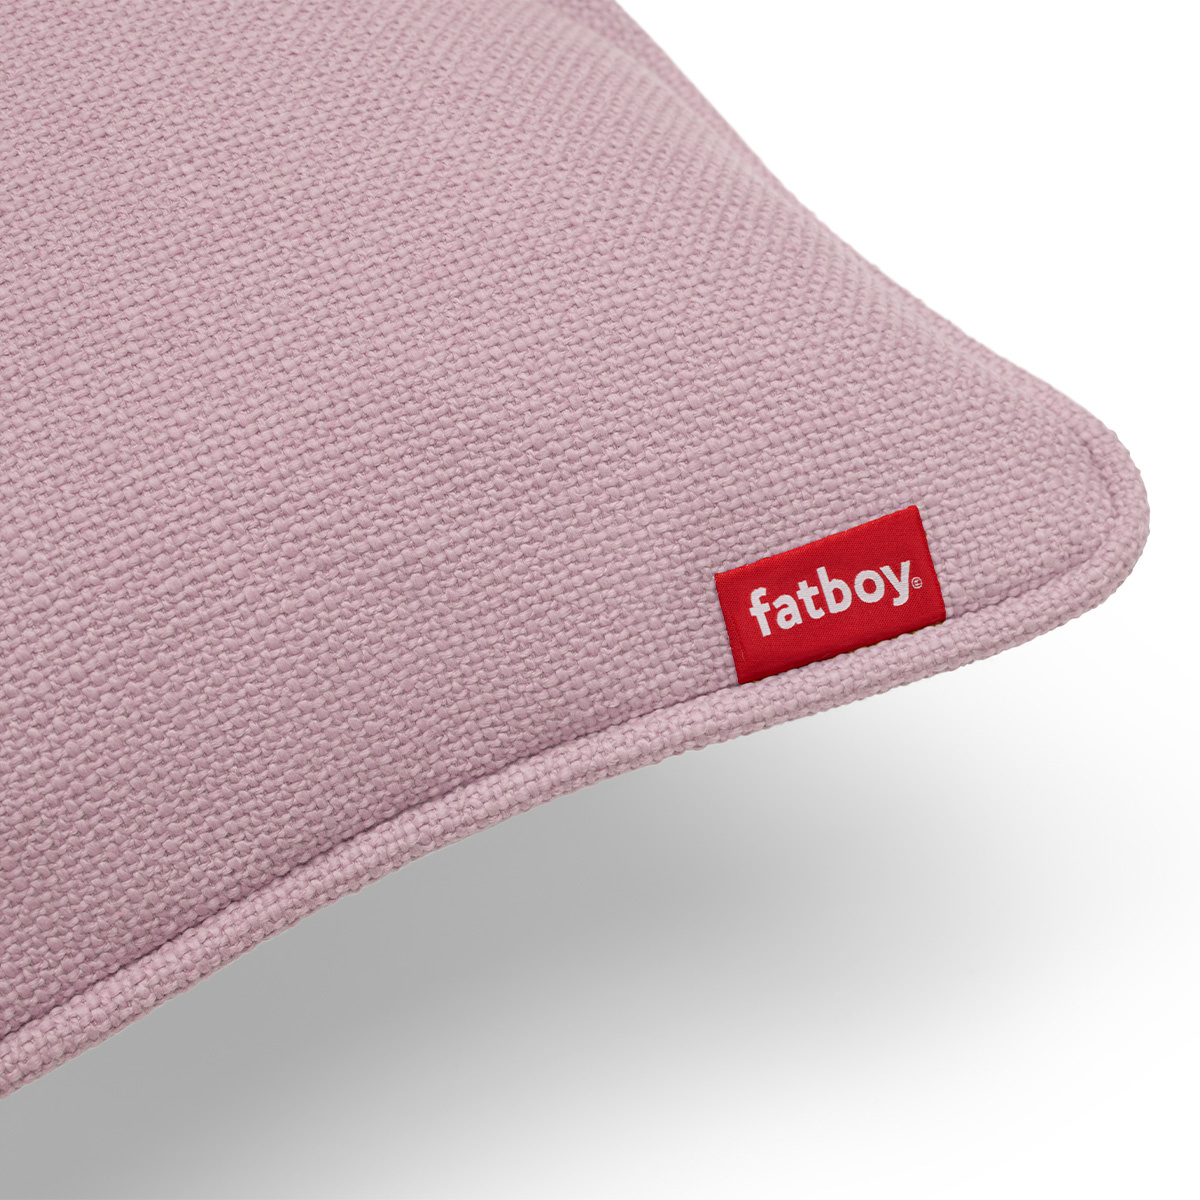 Fatboy Sumo - Puff Weave Pillows